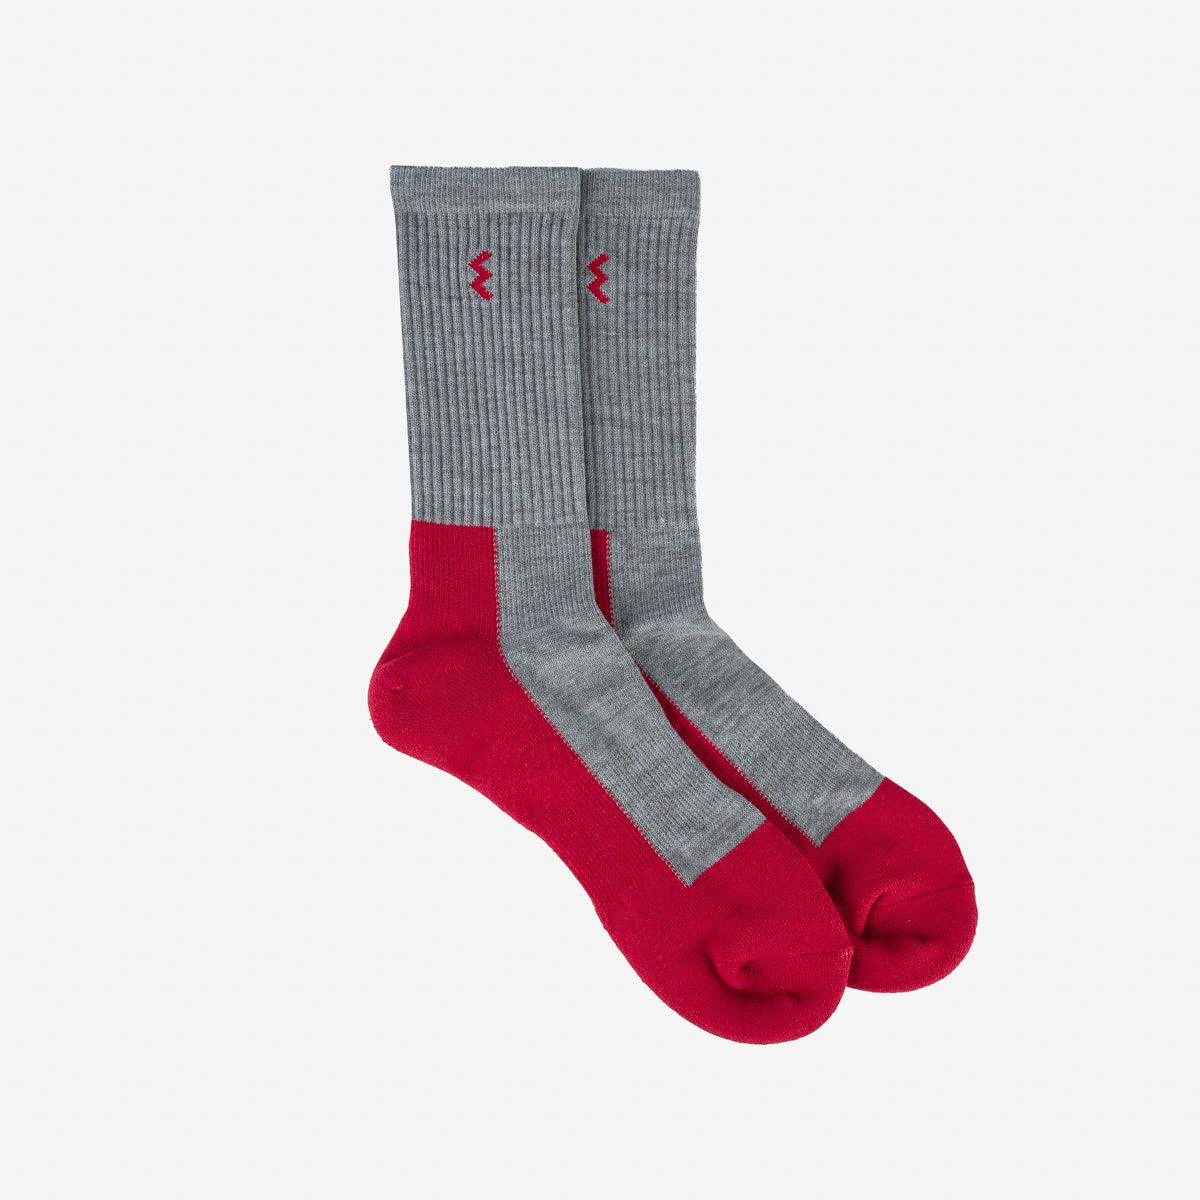 Image showing the IHG-030-GRY/RED - Iron Heart Work Boot Socks - Grey/Red which is a Socks described by the following info Accessories, IHSALE_M23, Iron Heart, Released, Socks and sold on the IRON HEART GERMANY online store